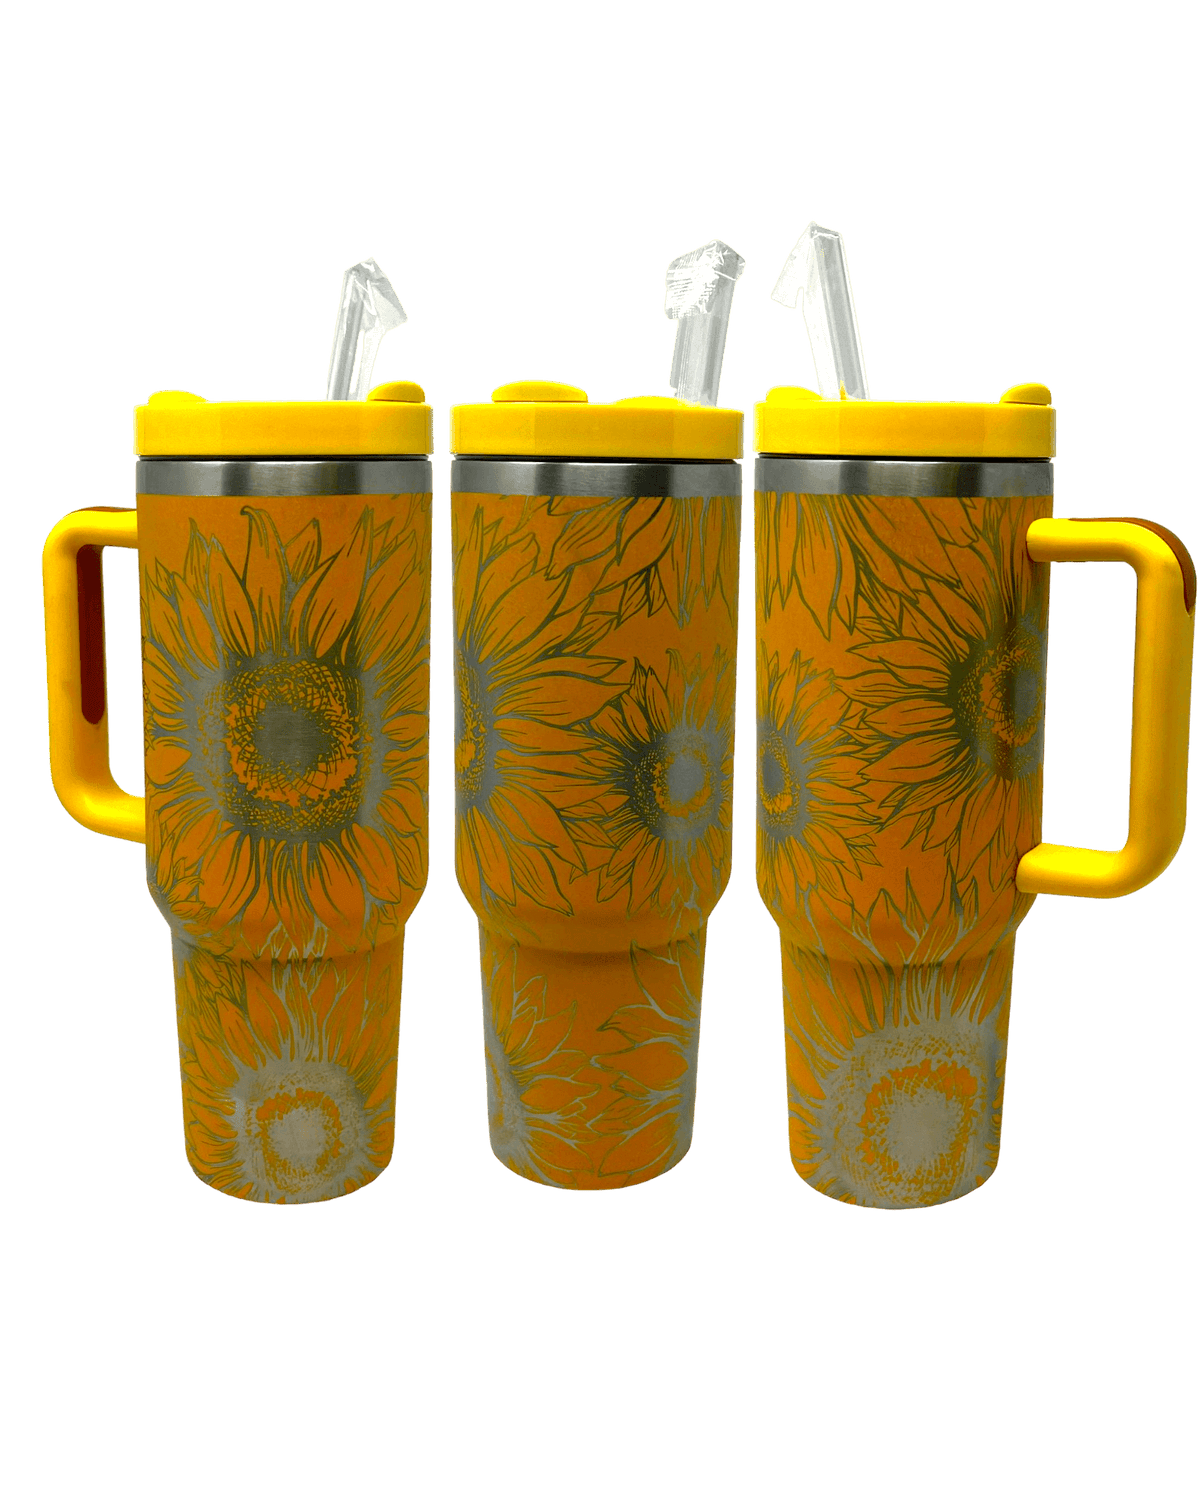 https://cdn.shopify.com/s/files/1/0606/5497/7184/files/wind_river_outpost_40_oz_stanley_dupe_sunflowers_tumblers_1200x.png?v=1690330117